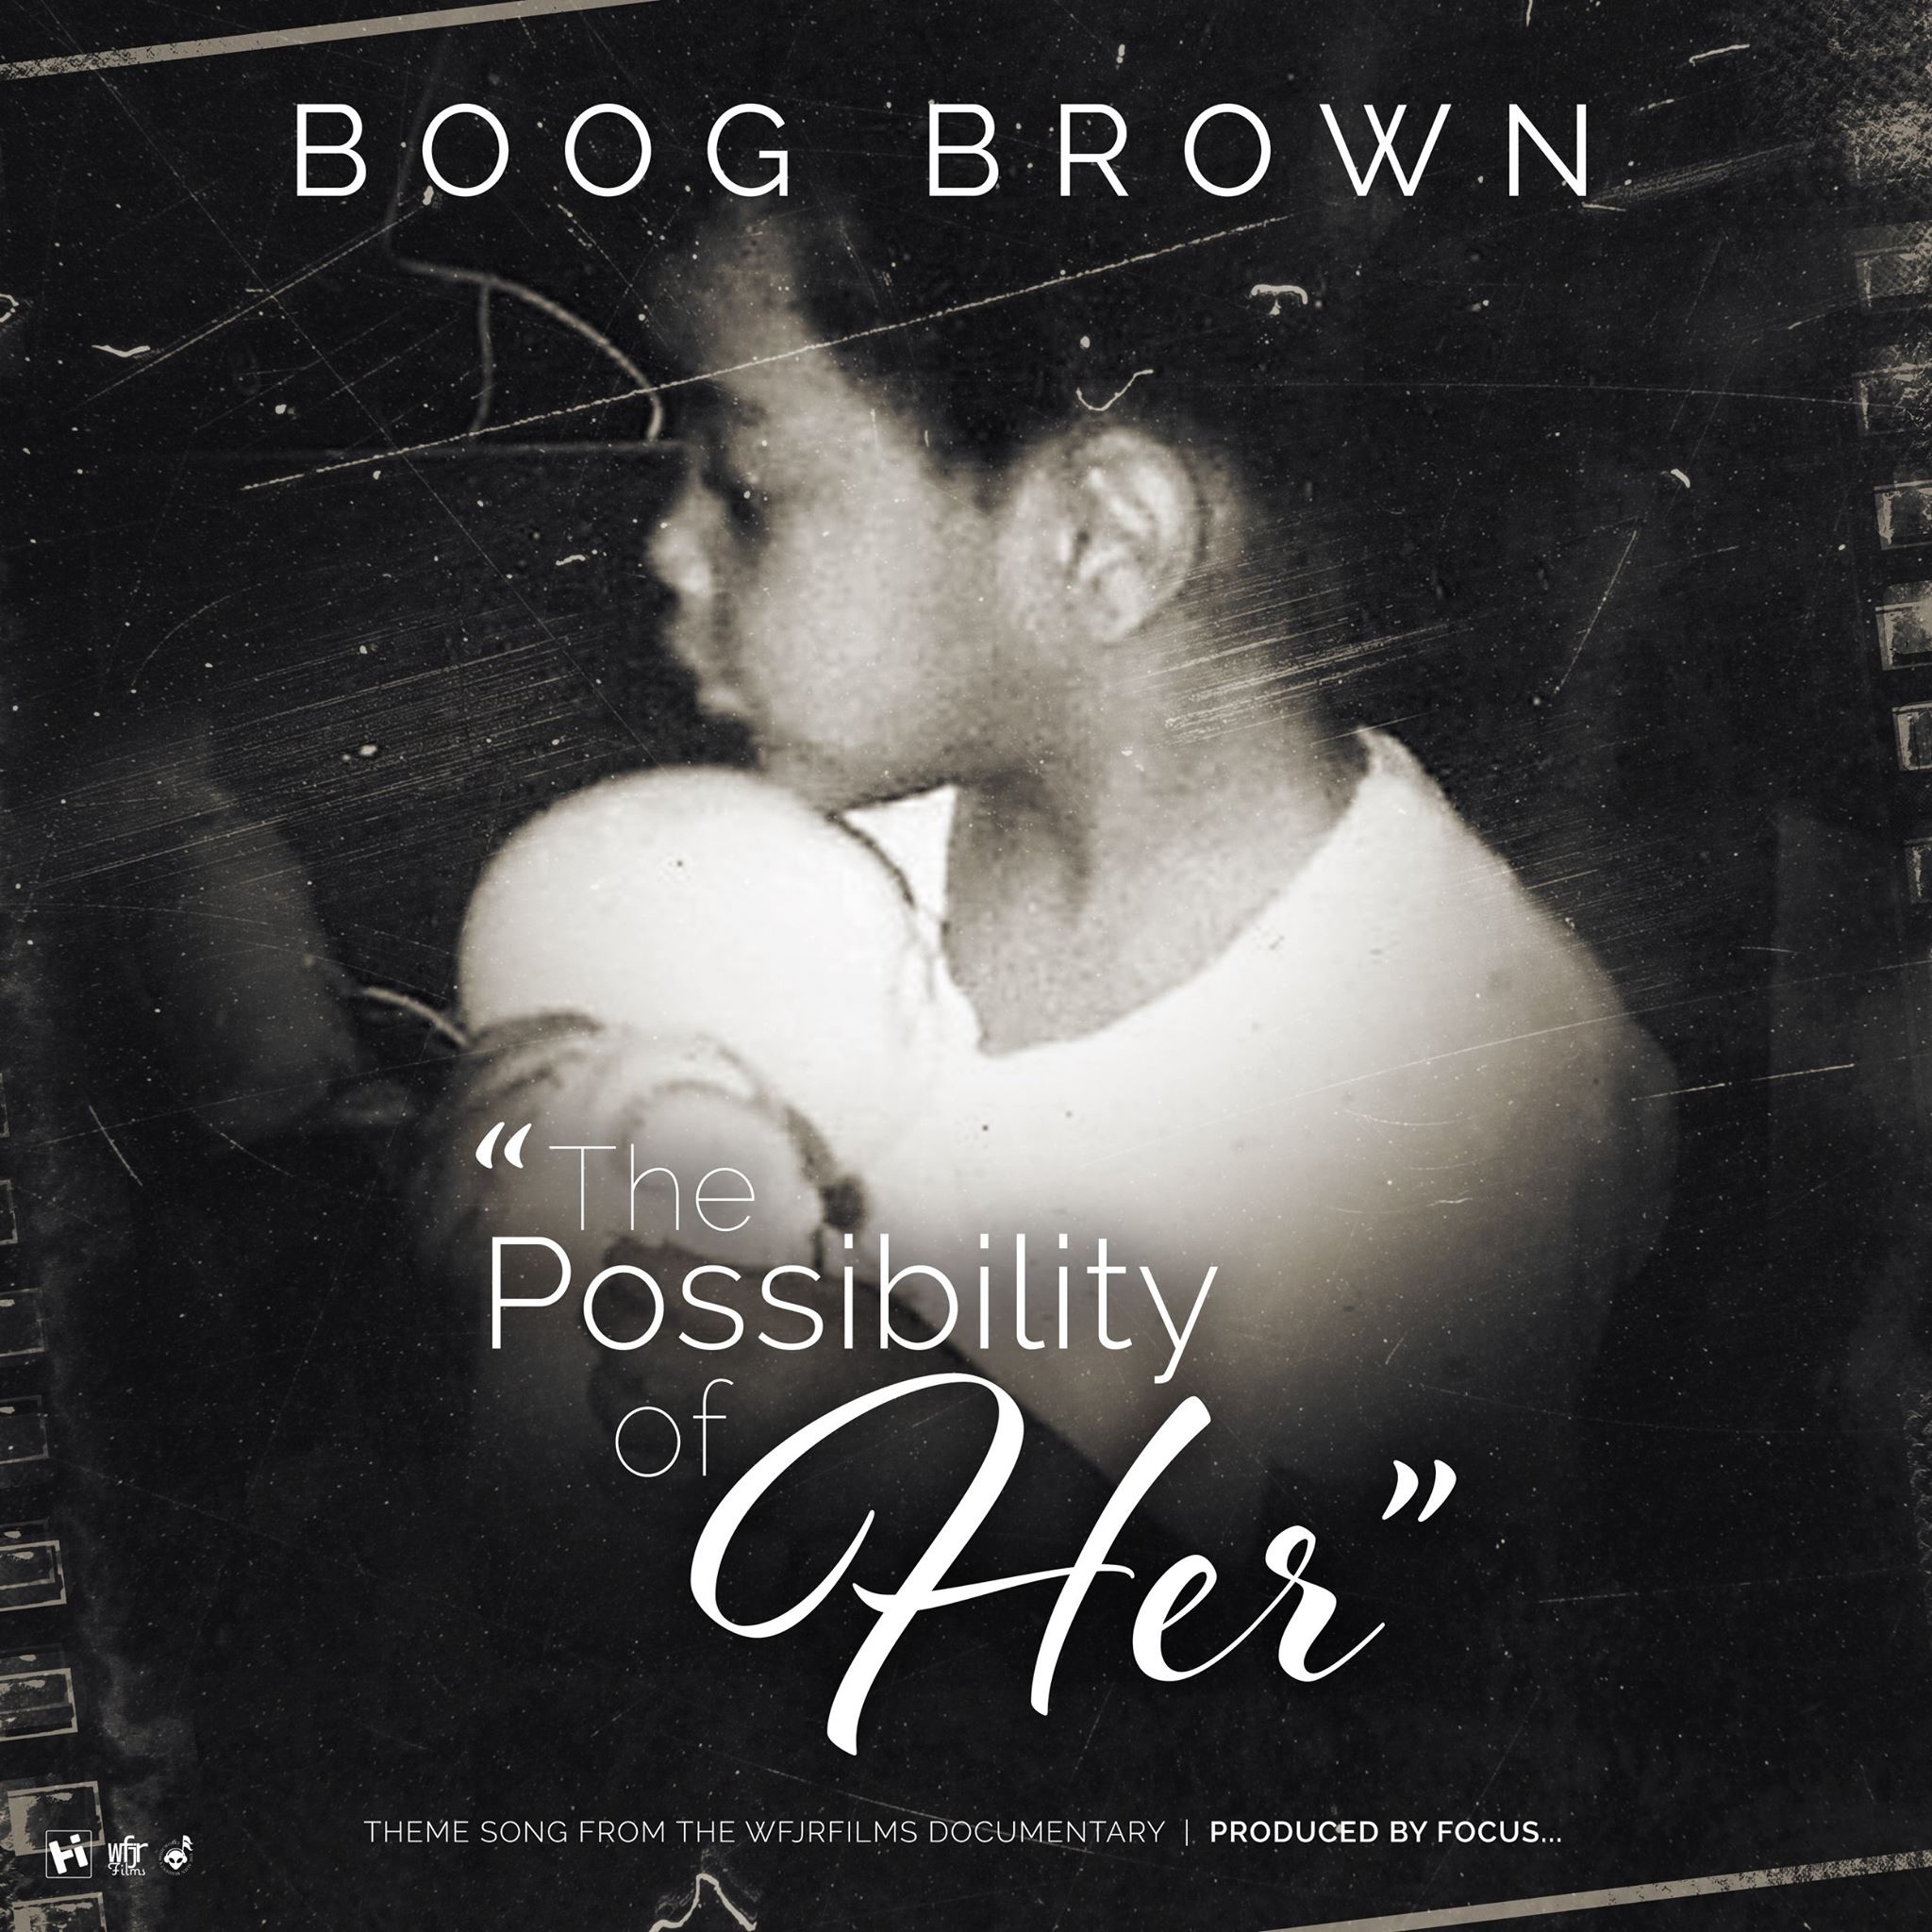 Boog Brown x Focus… Collab For “The Possibility Of Her”